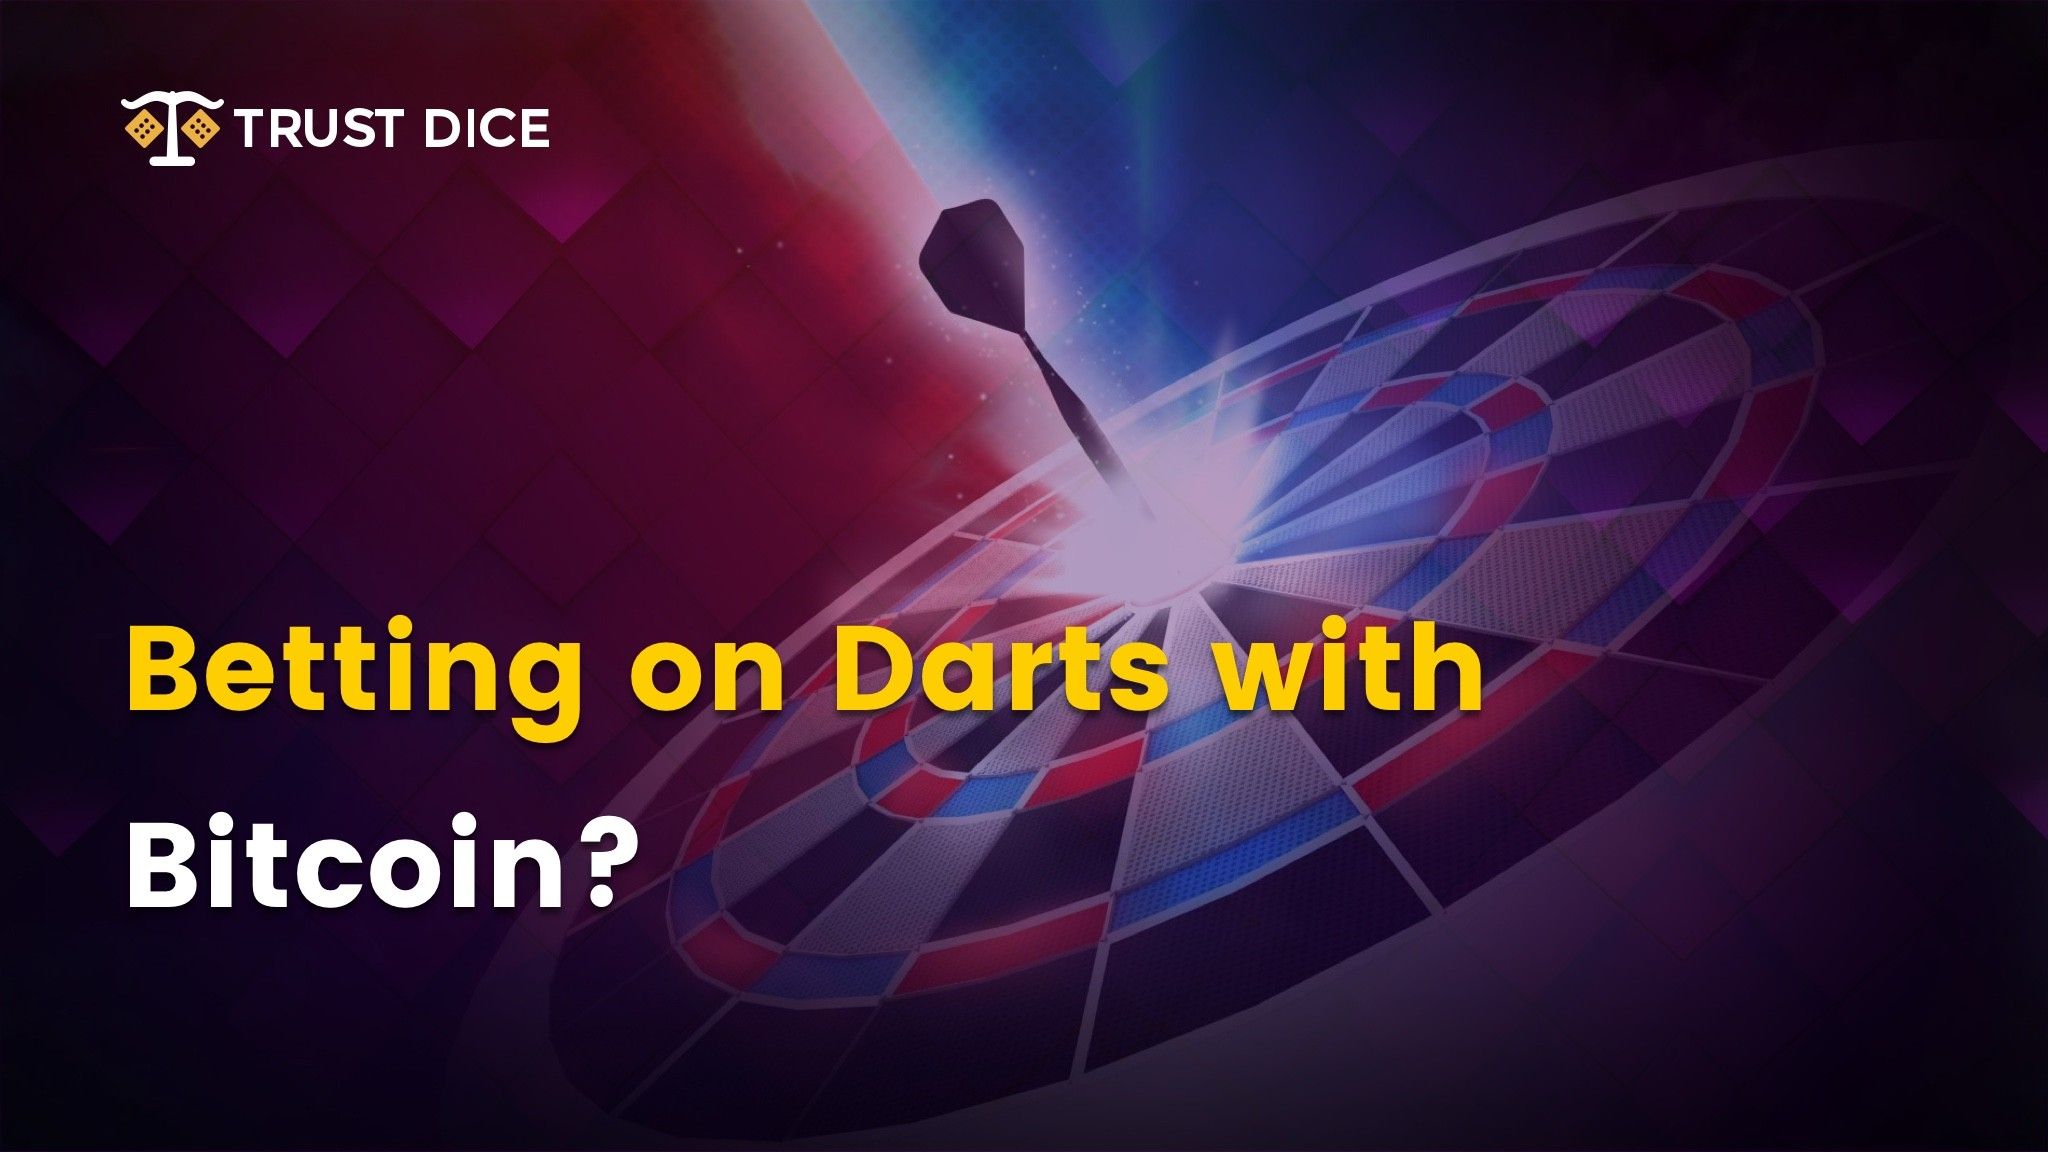 Betting on darts with bitcoin?